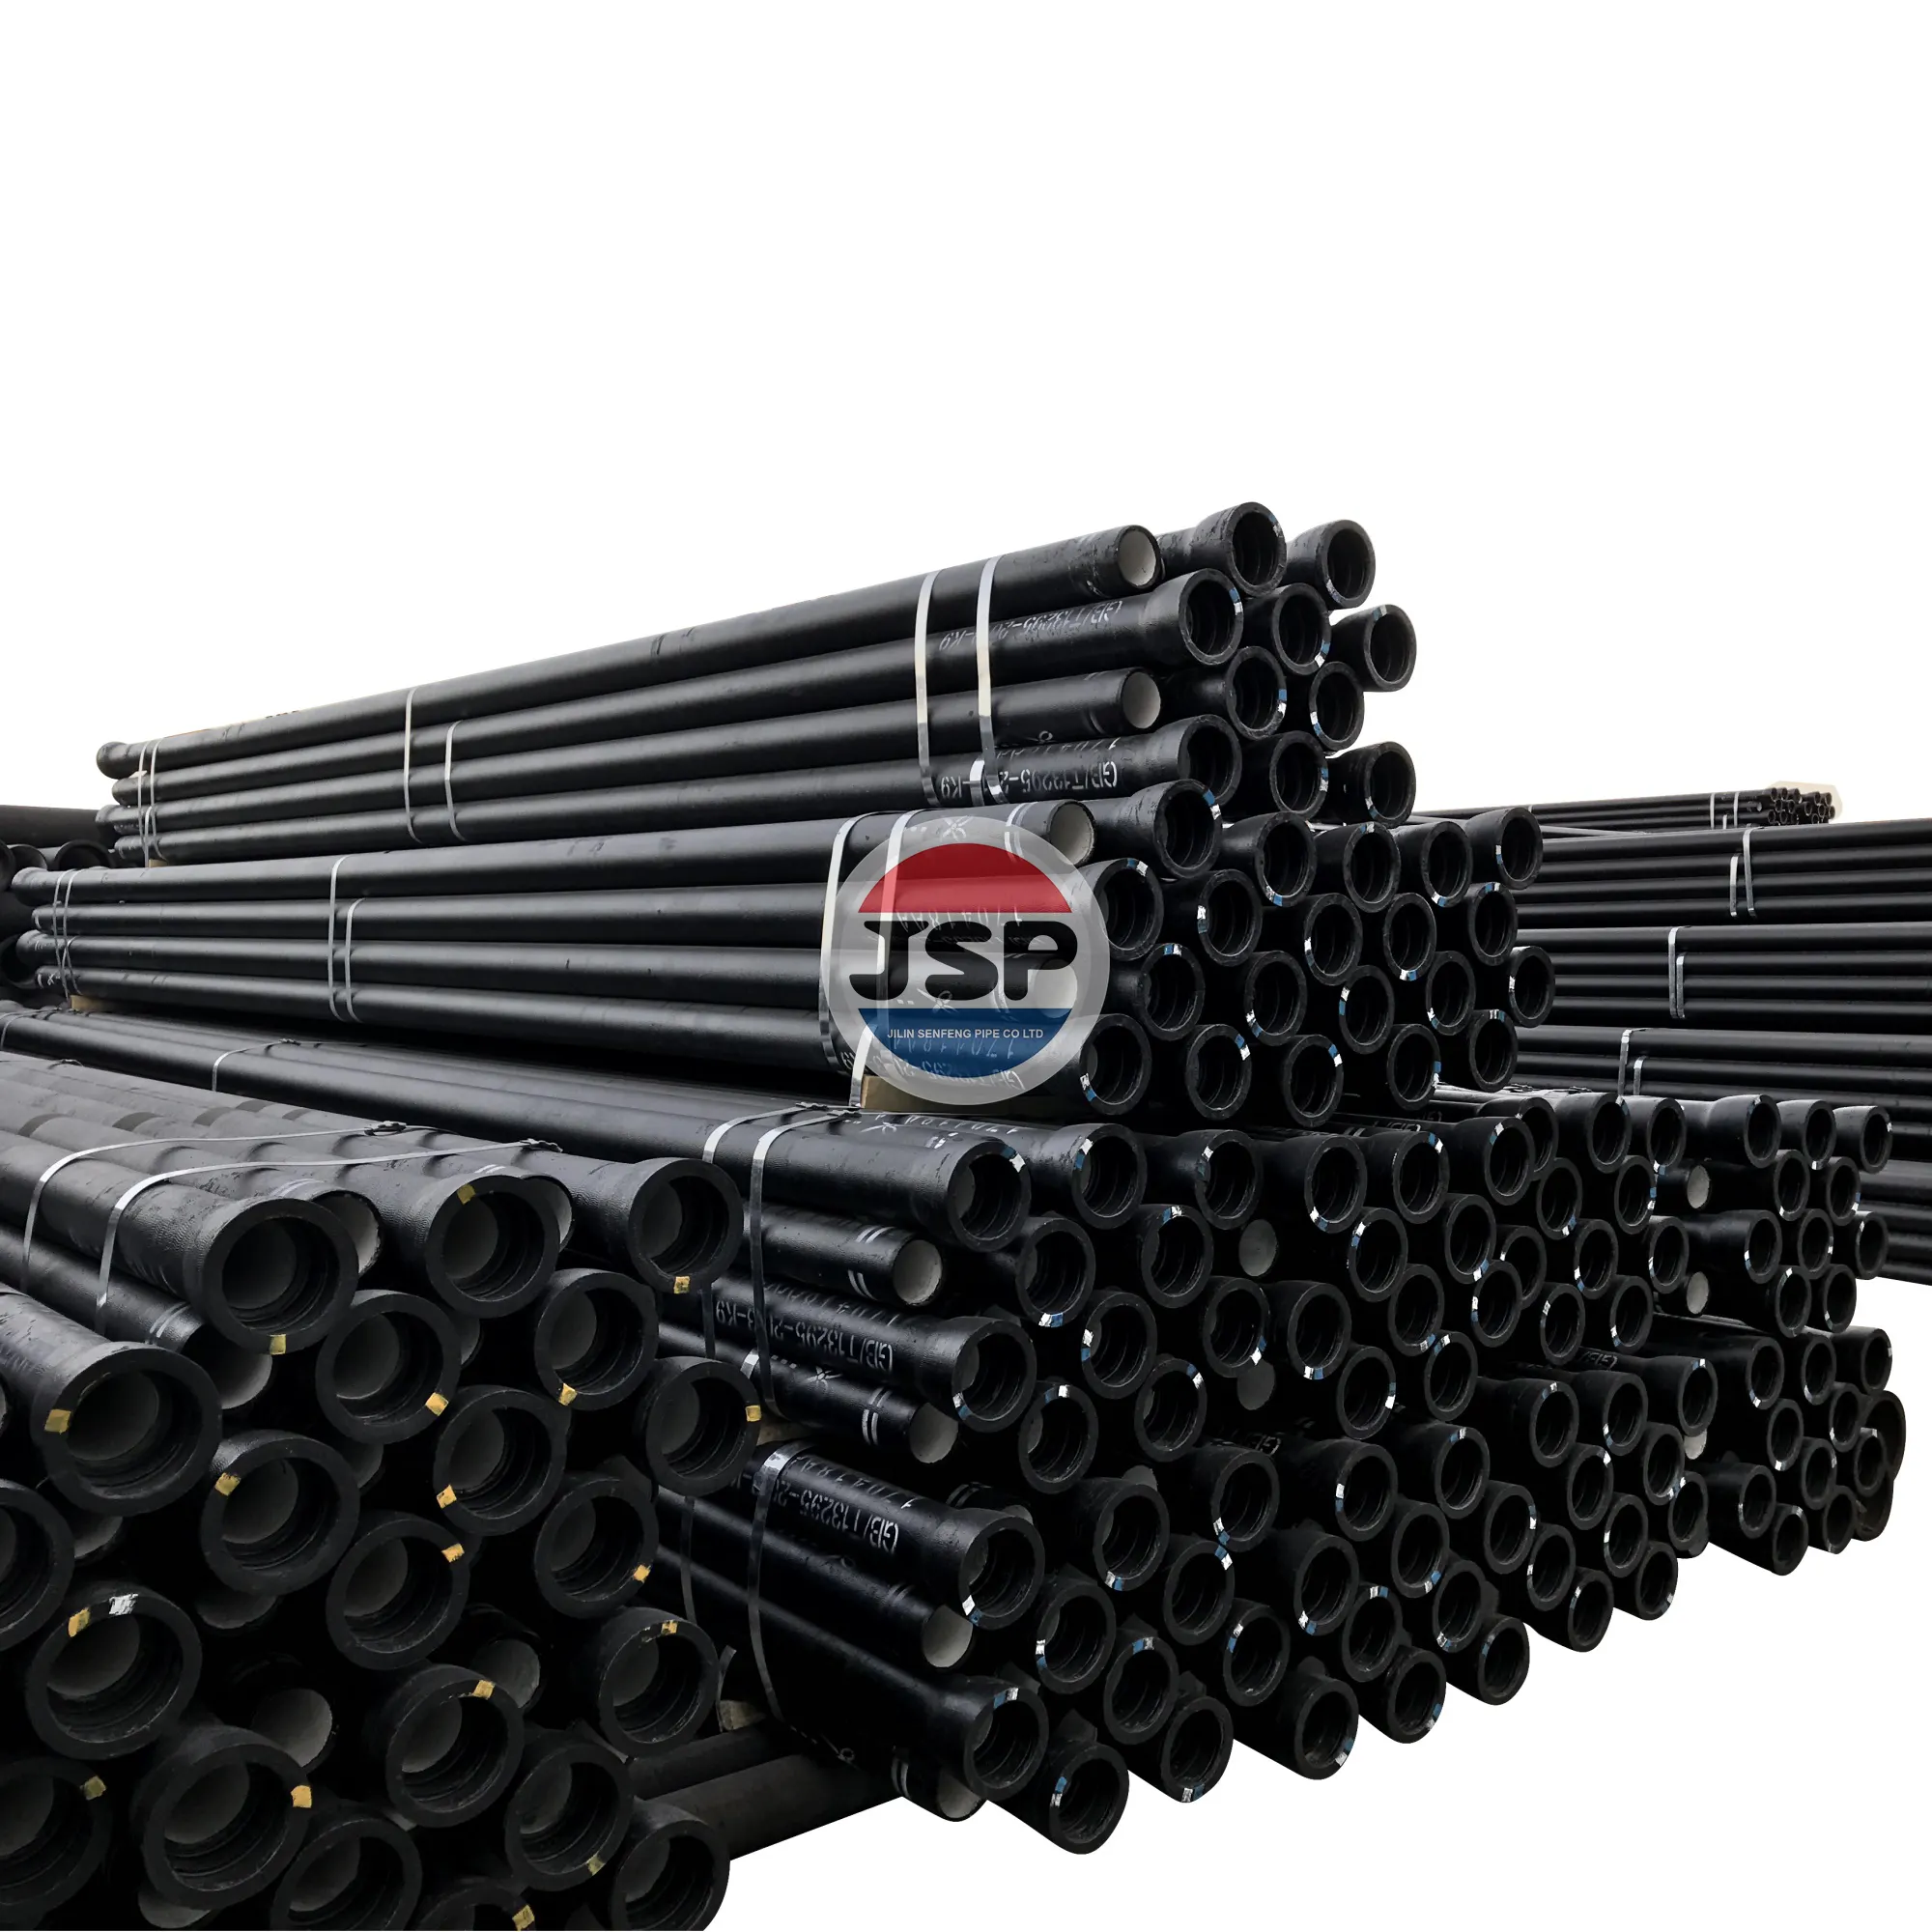 JSP Professional Pipe Fitting China Factory Hot Sale DN80-DN2600 Flanged Pipe Ductile Iron ISO2531 EN545 Ductile Cast Iron Pipe